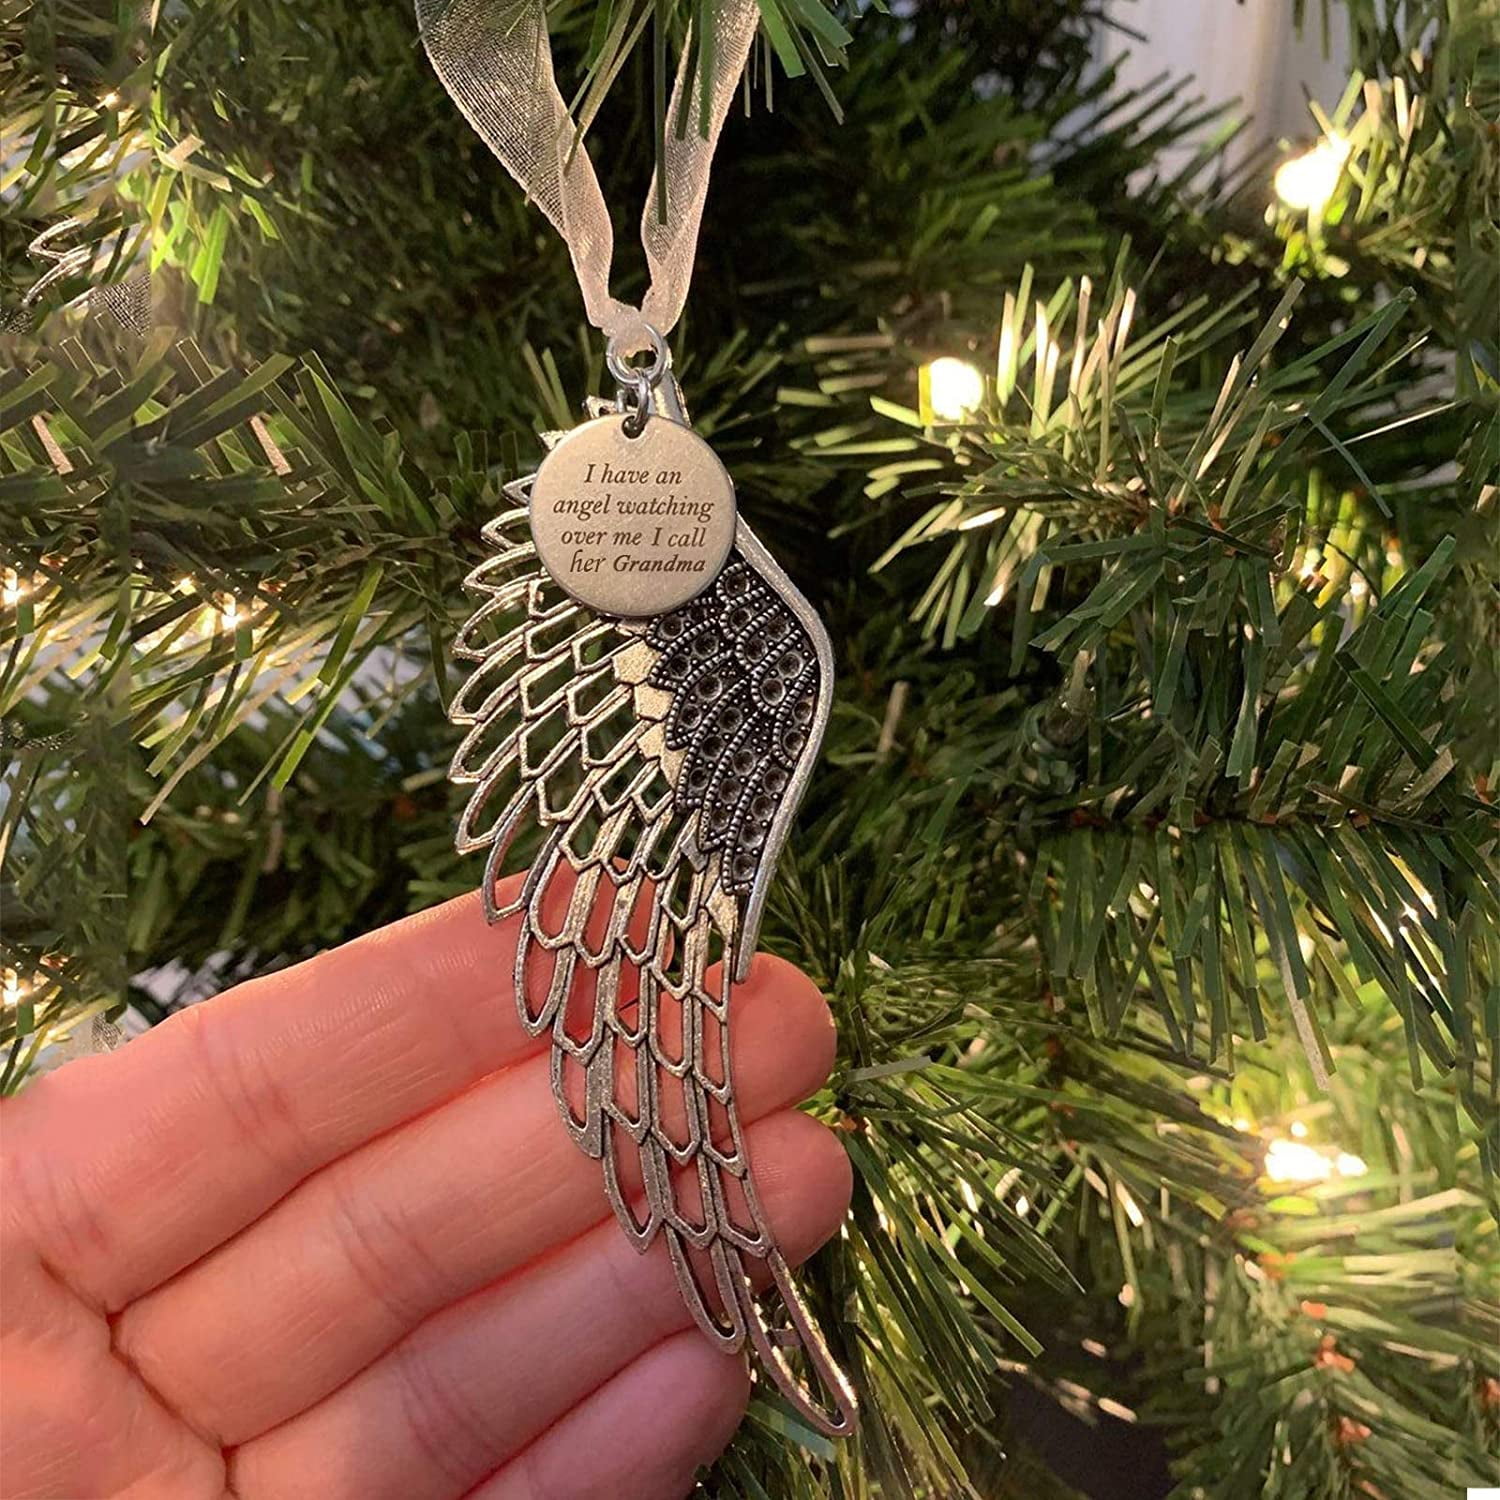 Best Friend Memorial Christmas Ornament Sympathy Gift with Angel Wing Charm 